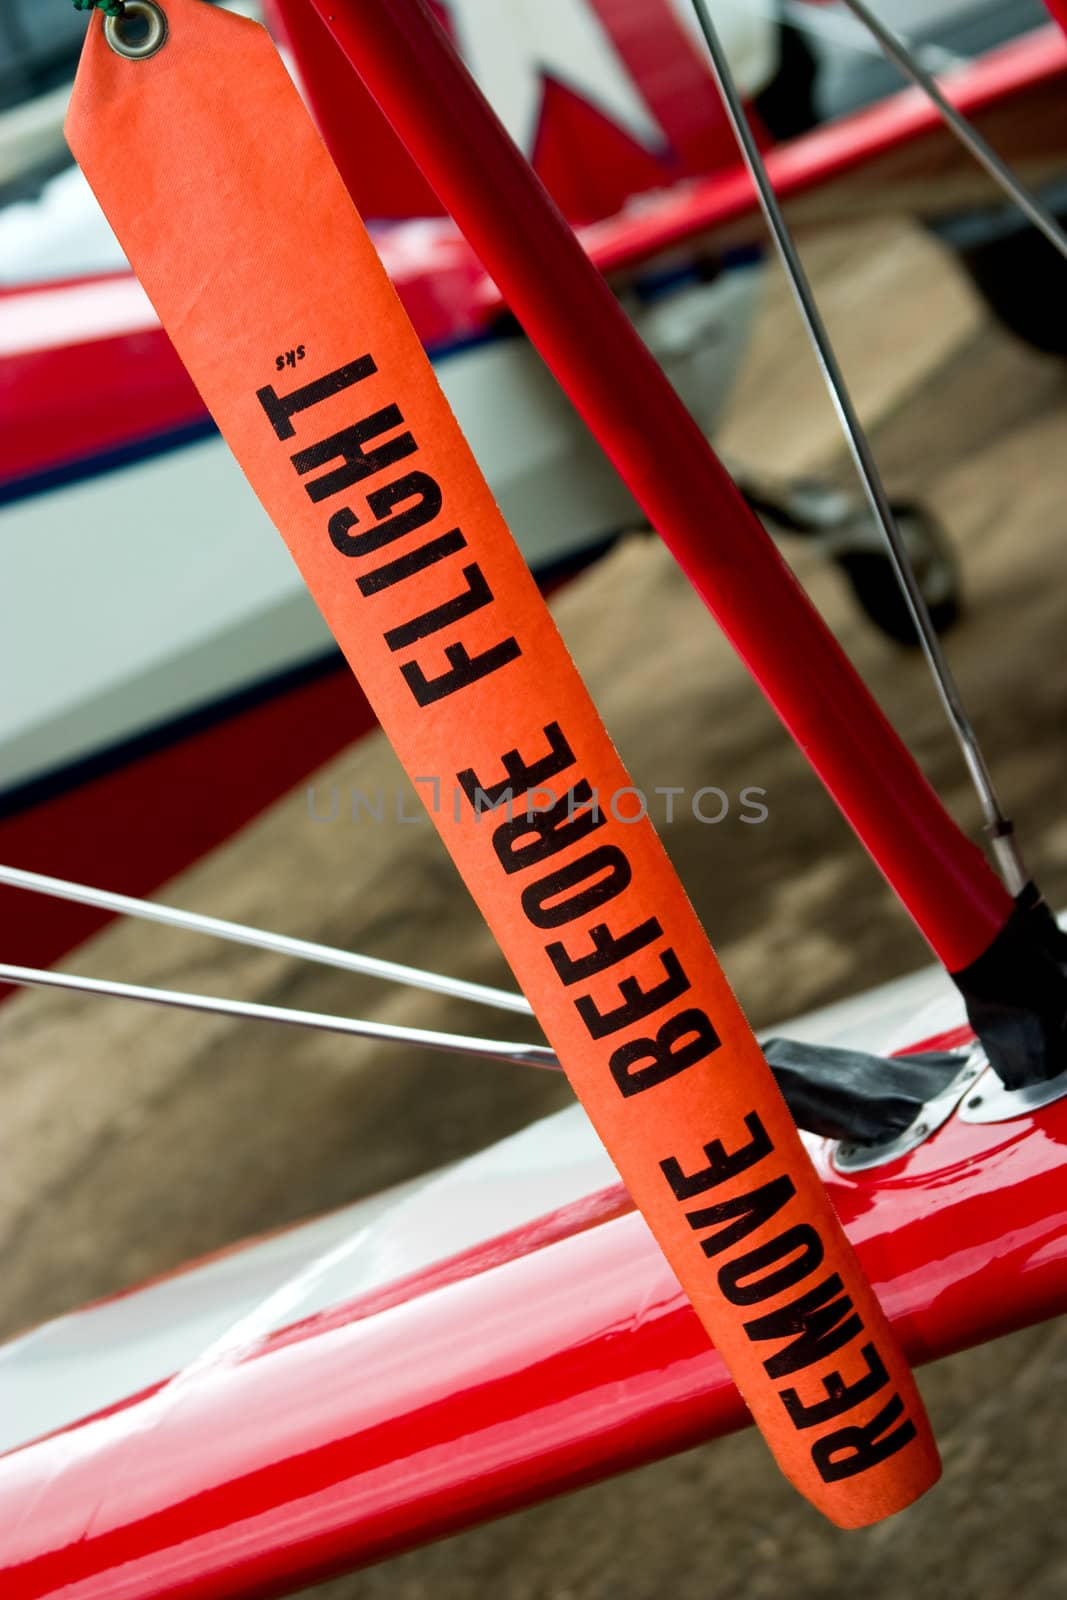 remove before flight  aviation safety tape